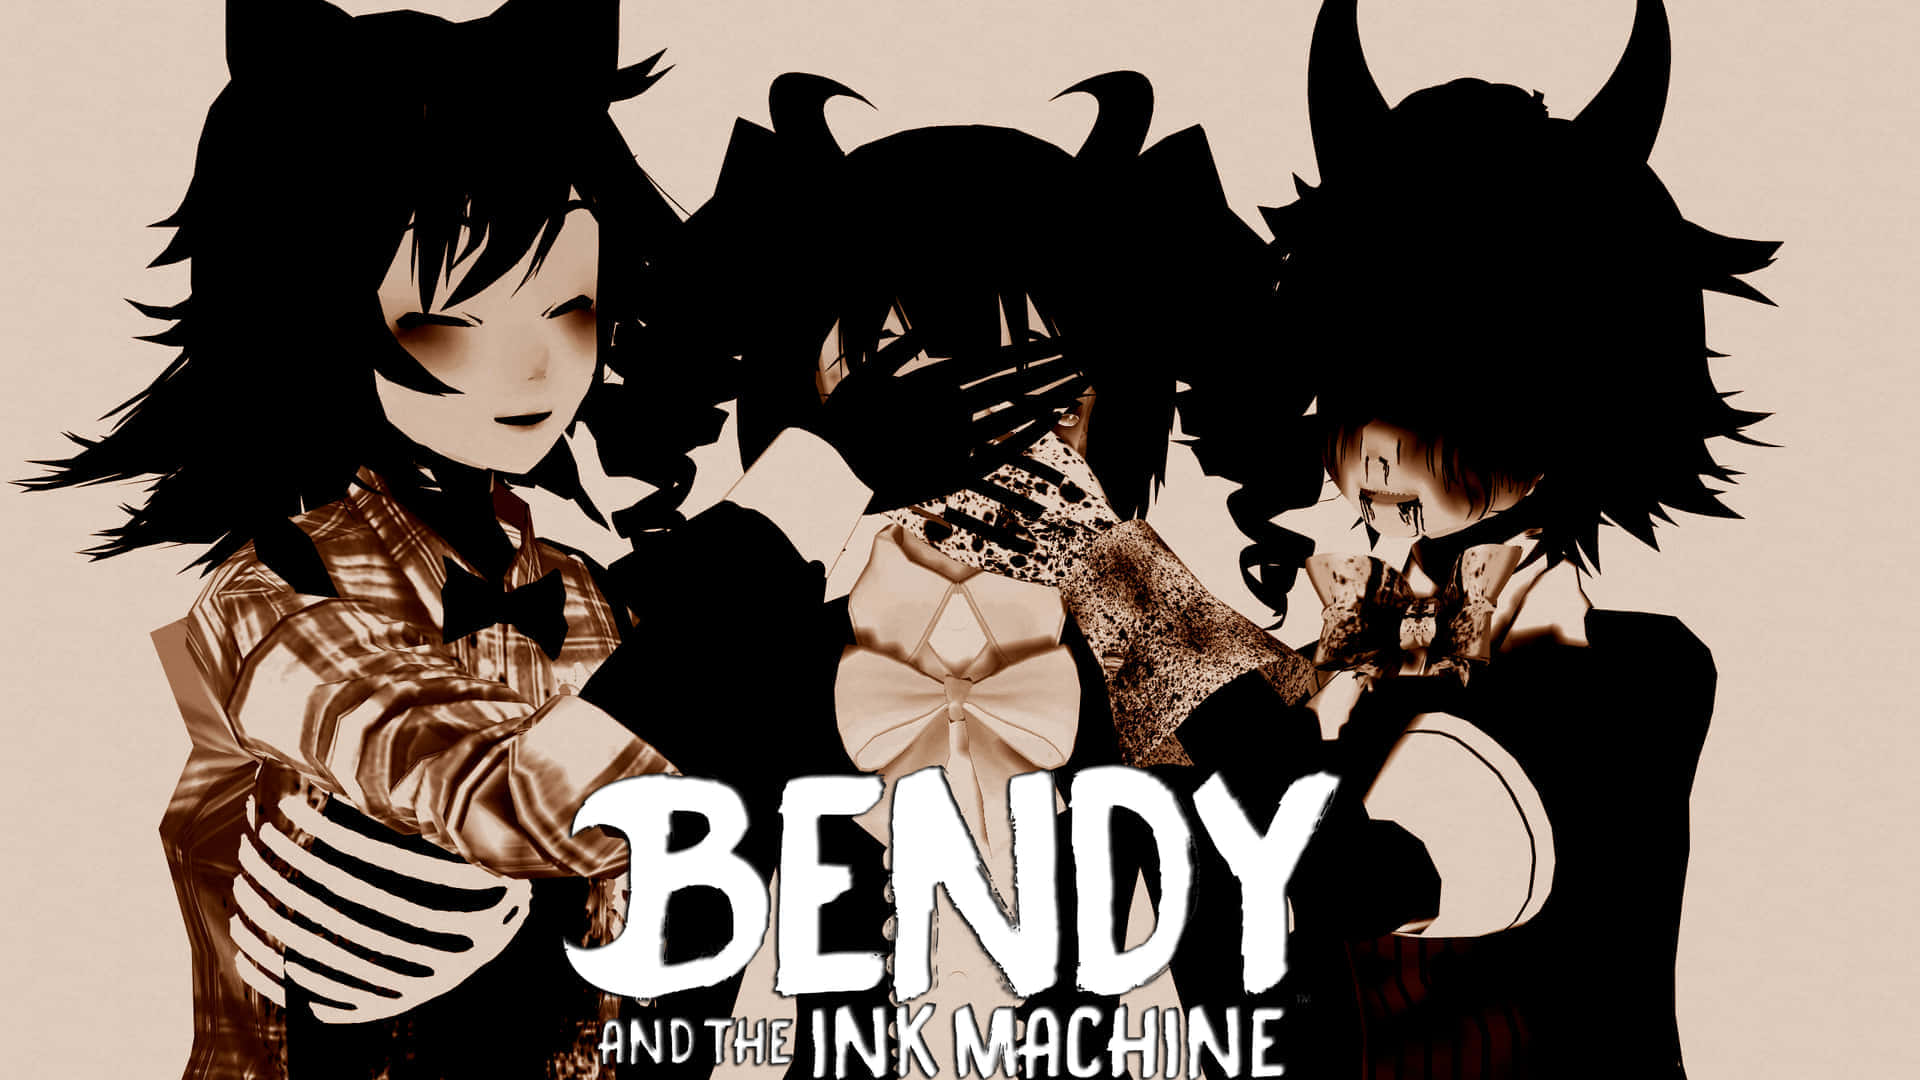 Bendy girl | Bendy and the ink machine, Anime, Ink